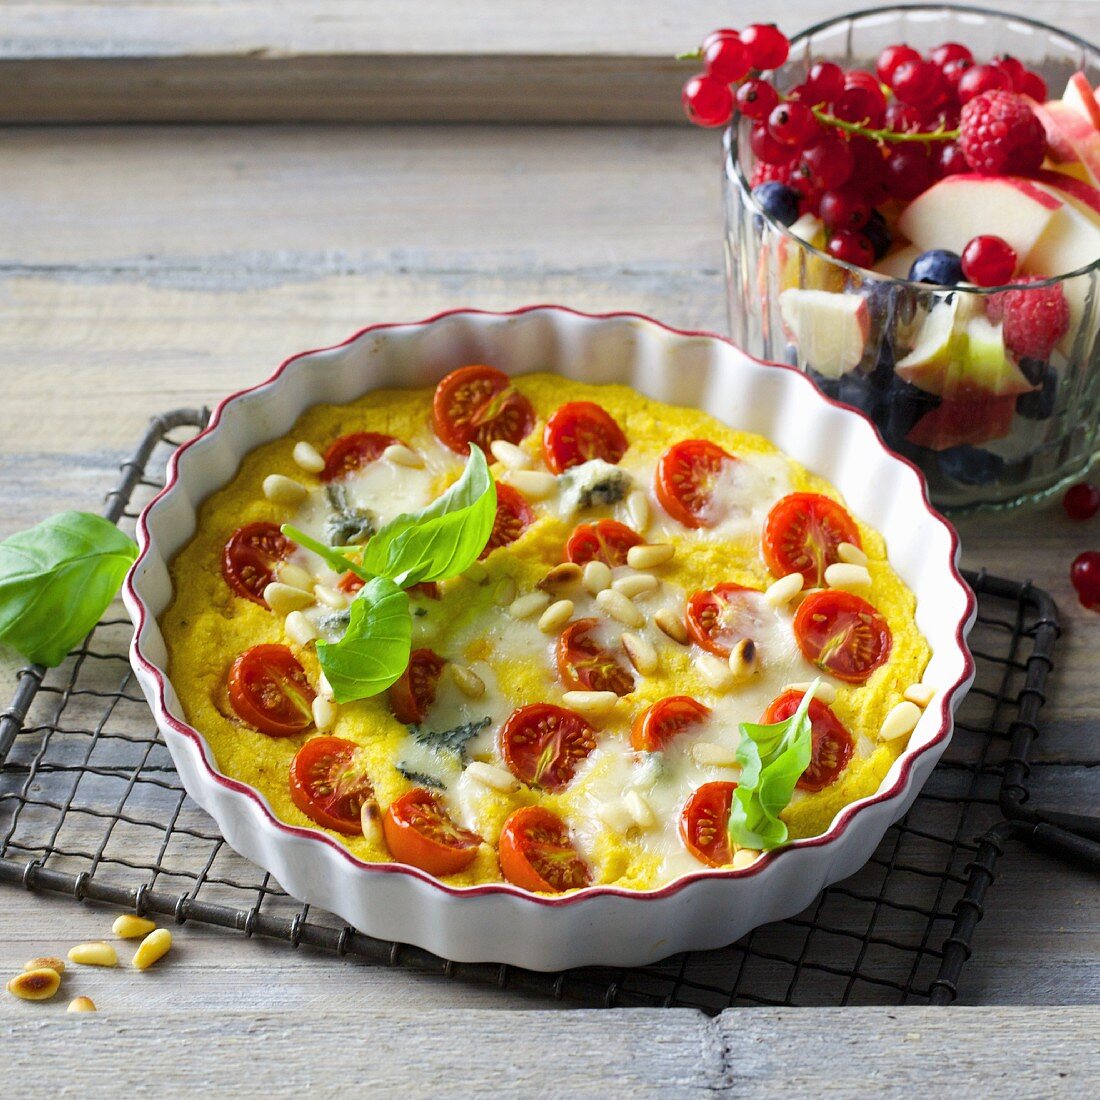 Onion and polenta quiche with cherry tomatoes and Gorgonzola